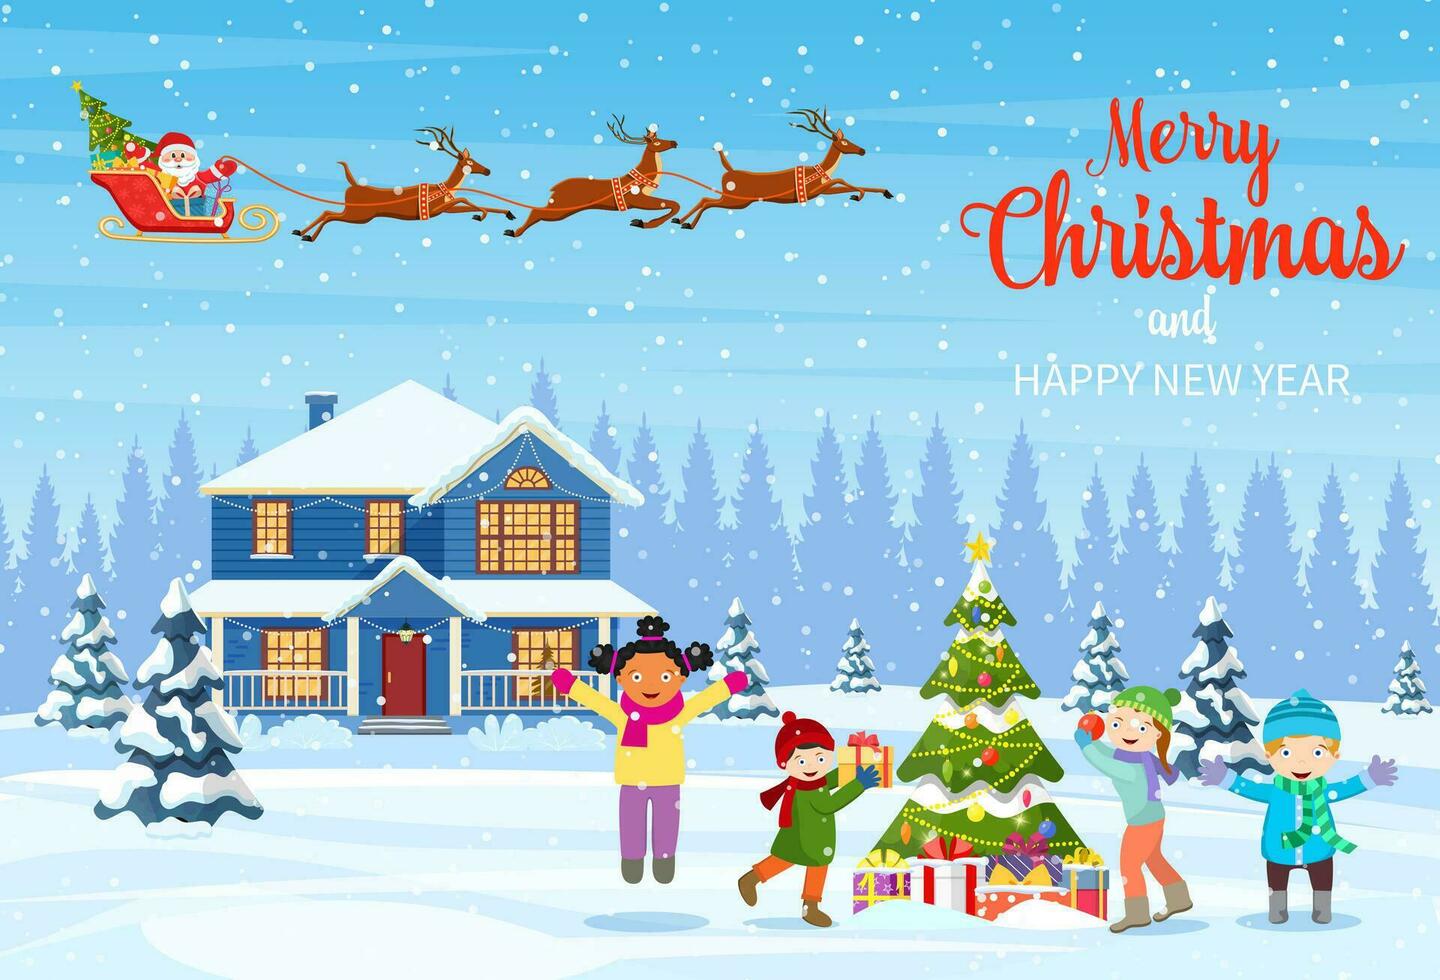 happy new year and merry Christmas greeting card. Christmas landscape. kids decorating a Christmas tree. Winter holidays. Santa Claus with deers in sky. Vector illustration in flat style